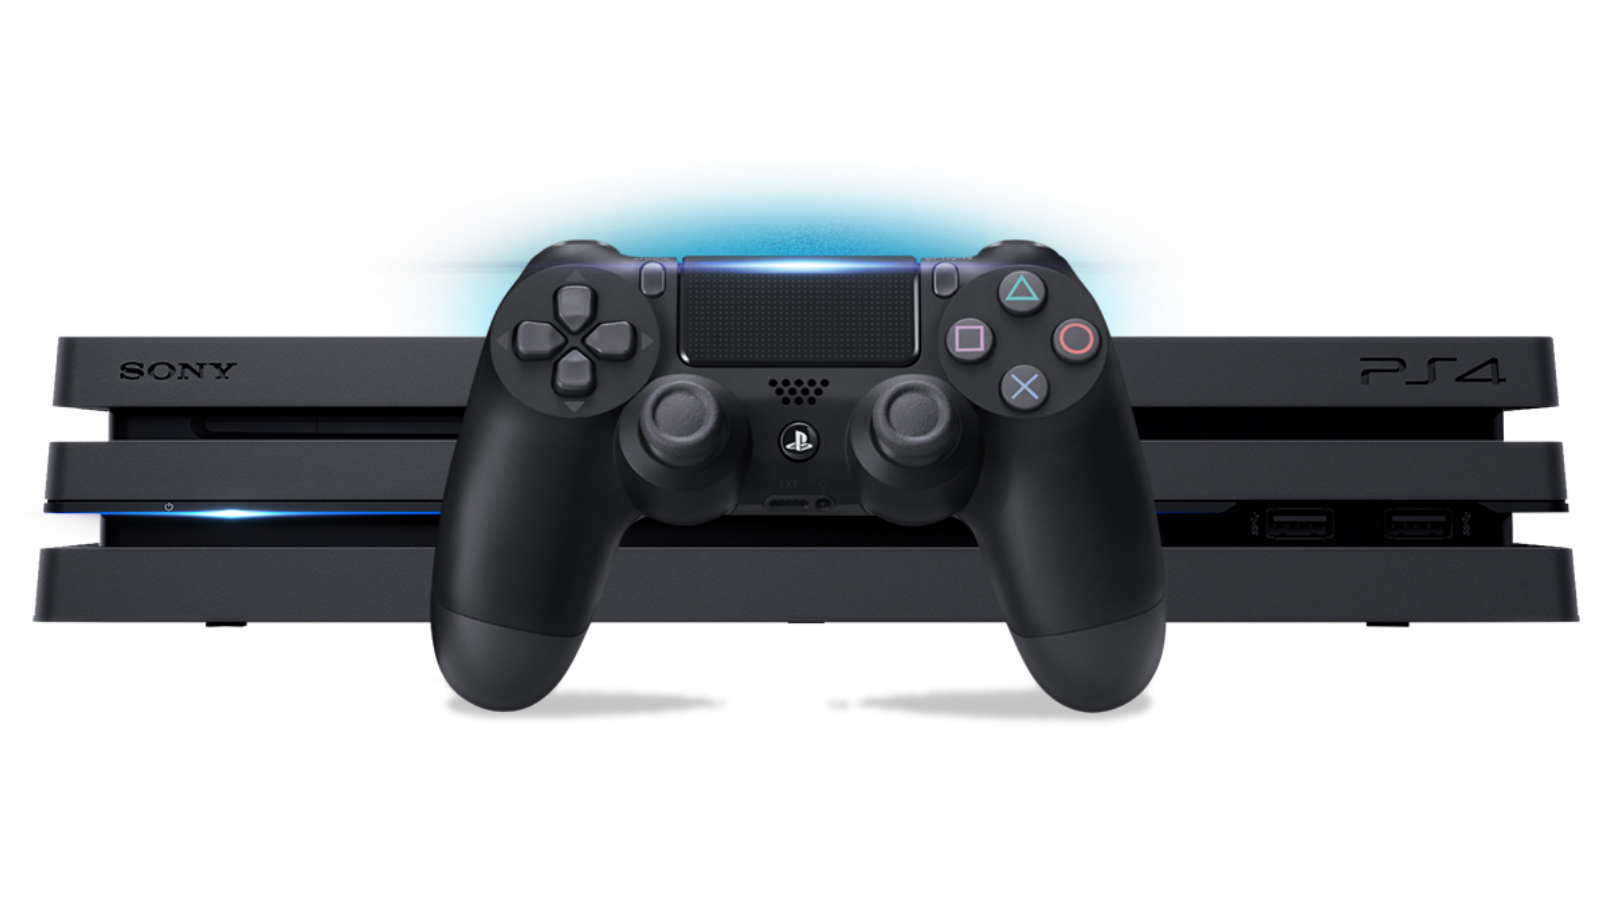 PS4 Review: Is Sony's console still worth a buy?